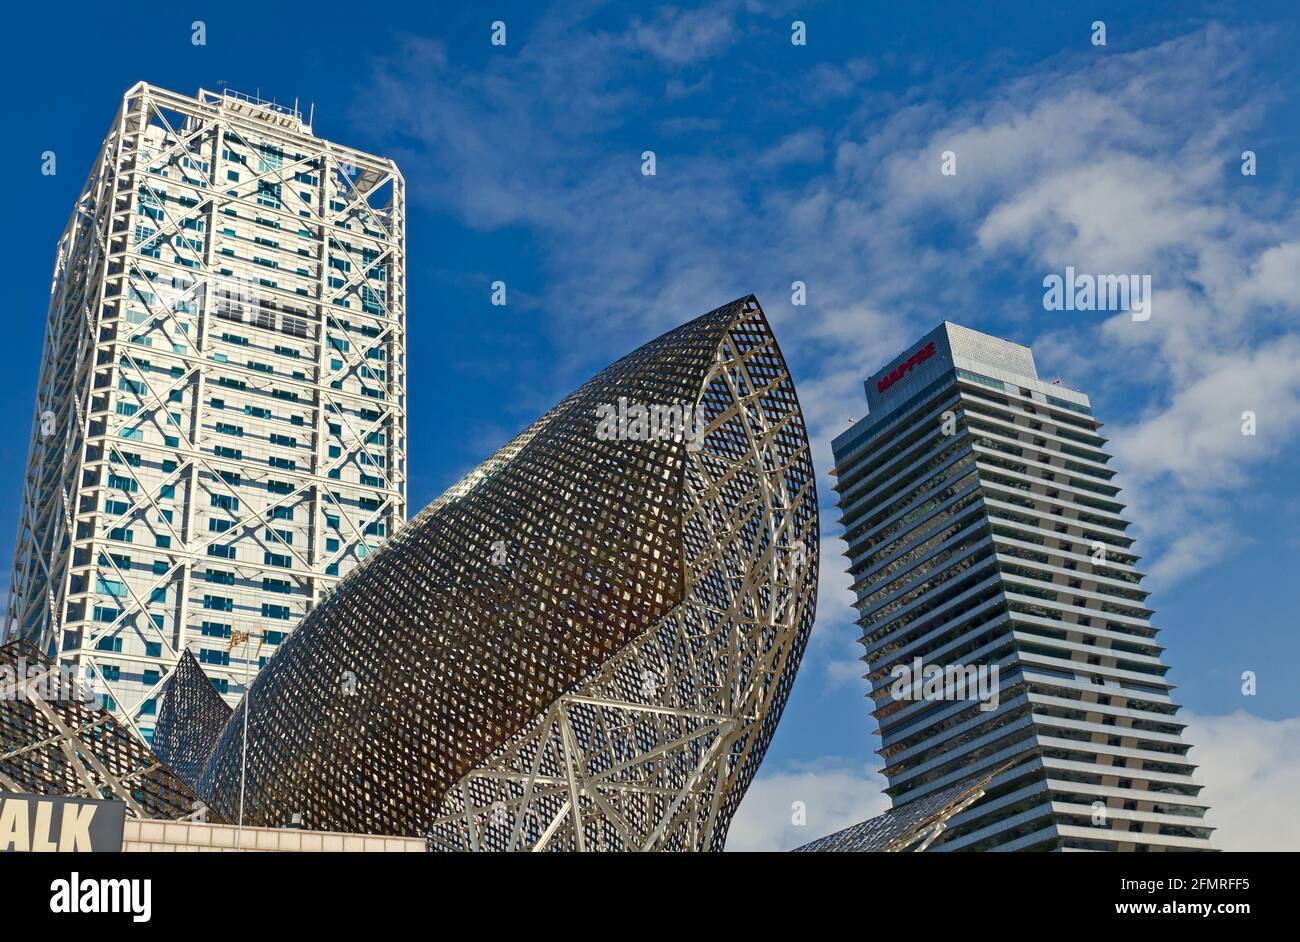 BARCELONA, SPAIN - SEPTEMBER 04: Frank Gehry's modern El Peix d'Or sculpture is located in Barcelona's Vila Olimpica, Olympic Village for the 1992 Stock Photo